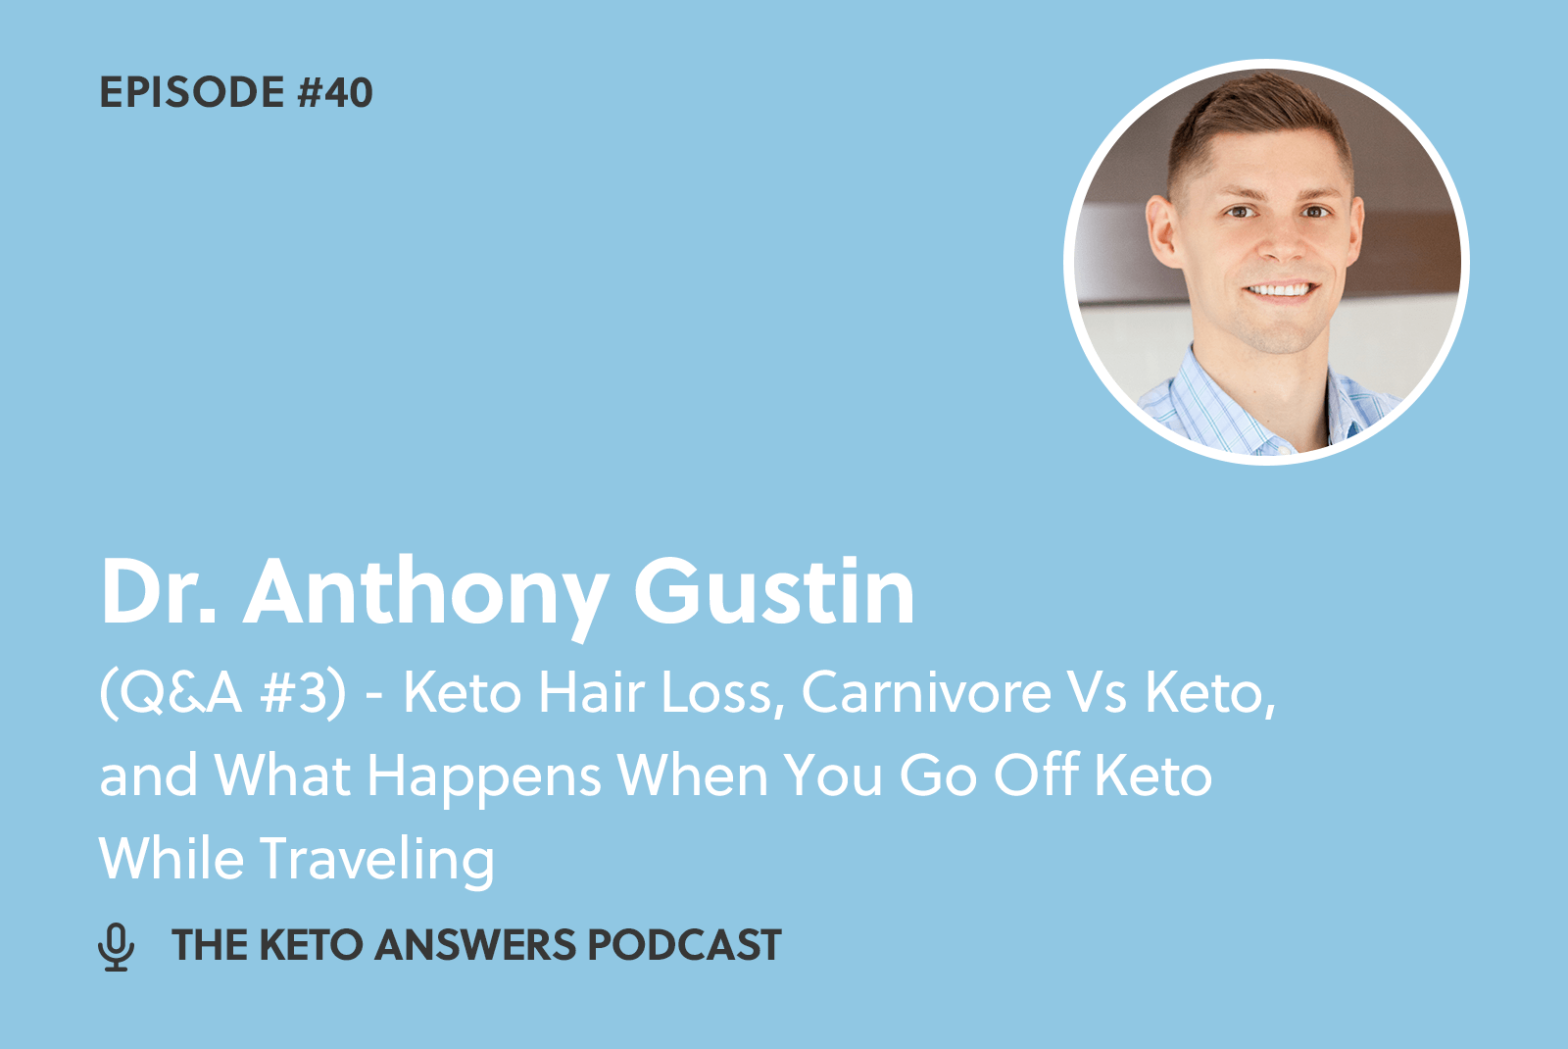 040: Dr. Anthony Gustin - (Q&A #3) - Keto Hair Loss, Carnivore Vs Keto, And What Happens When You Go Off Keto While Traveling